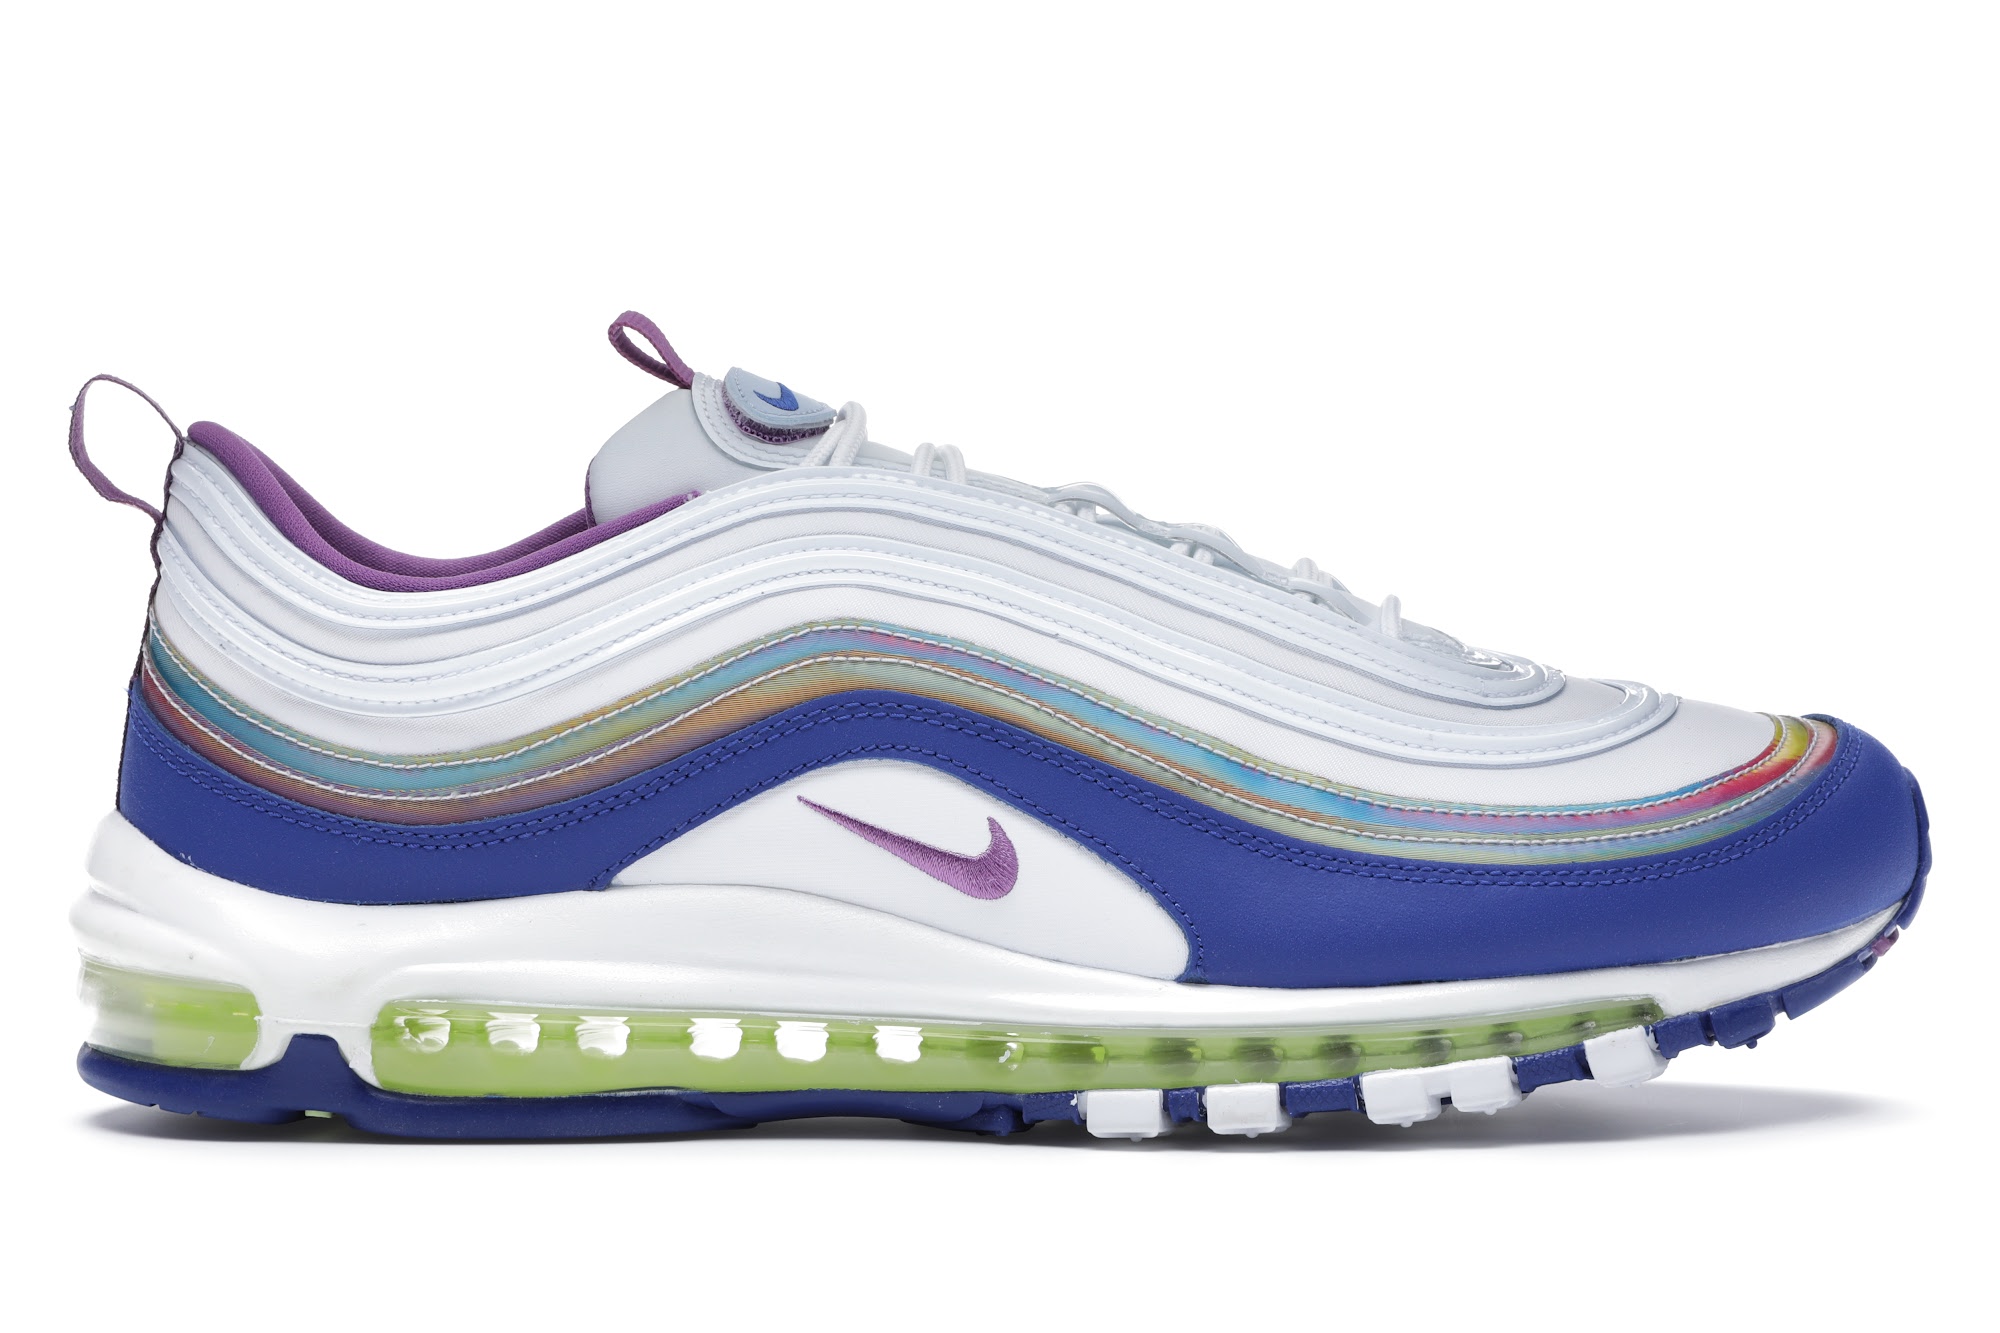 easter air max 97 pink white yellow green